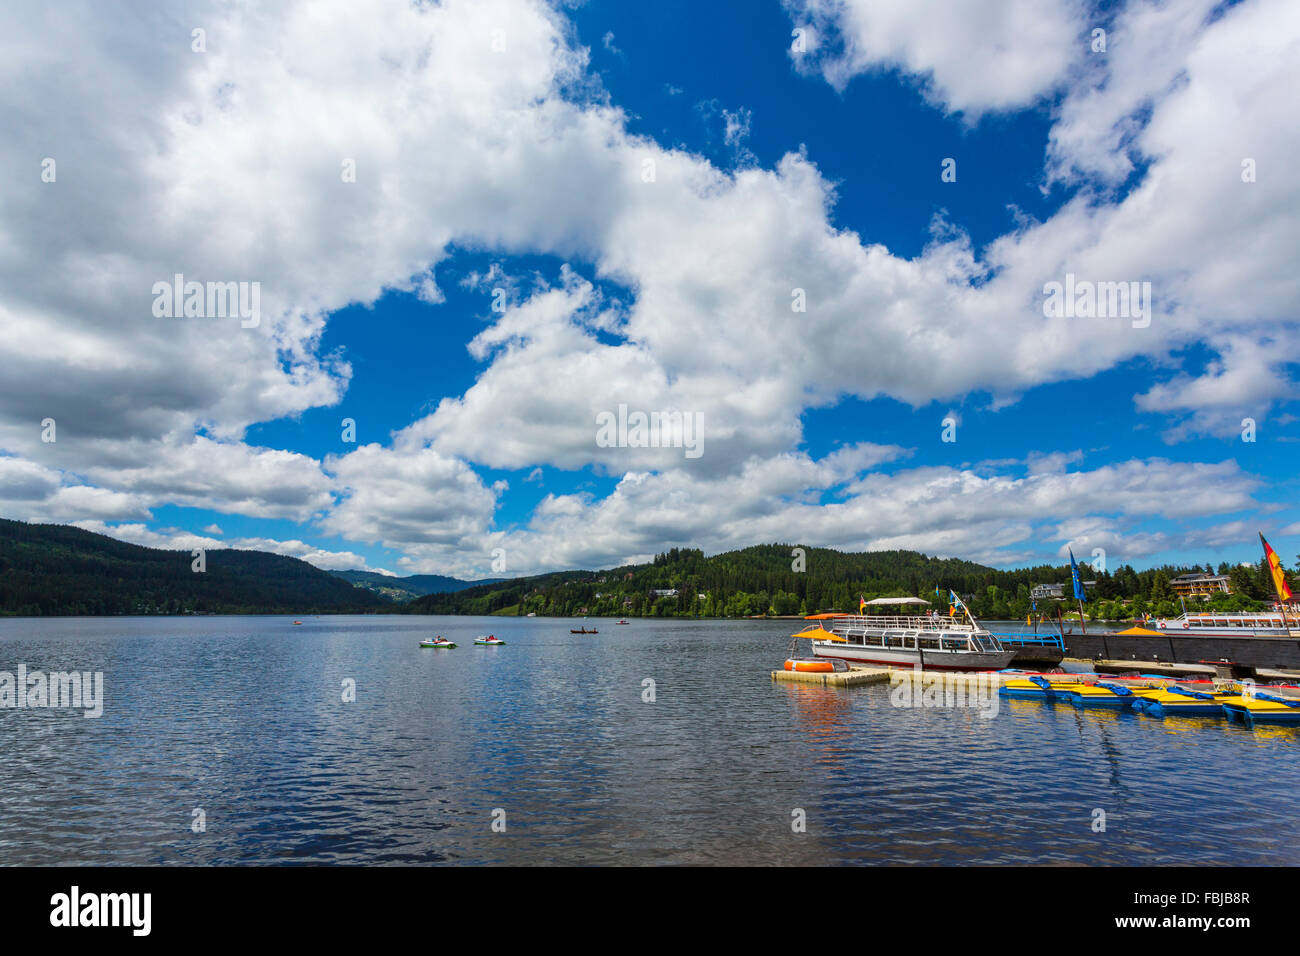 Tourist boats, Titisee, Titisee Neustadt, Black Forest, Baden-Württemberg, Germany, Europe Stock Photo